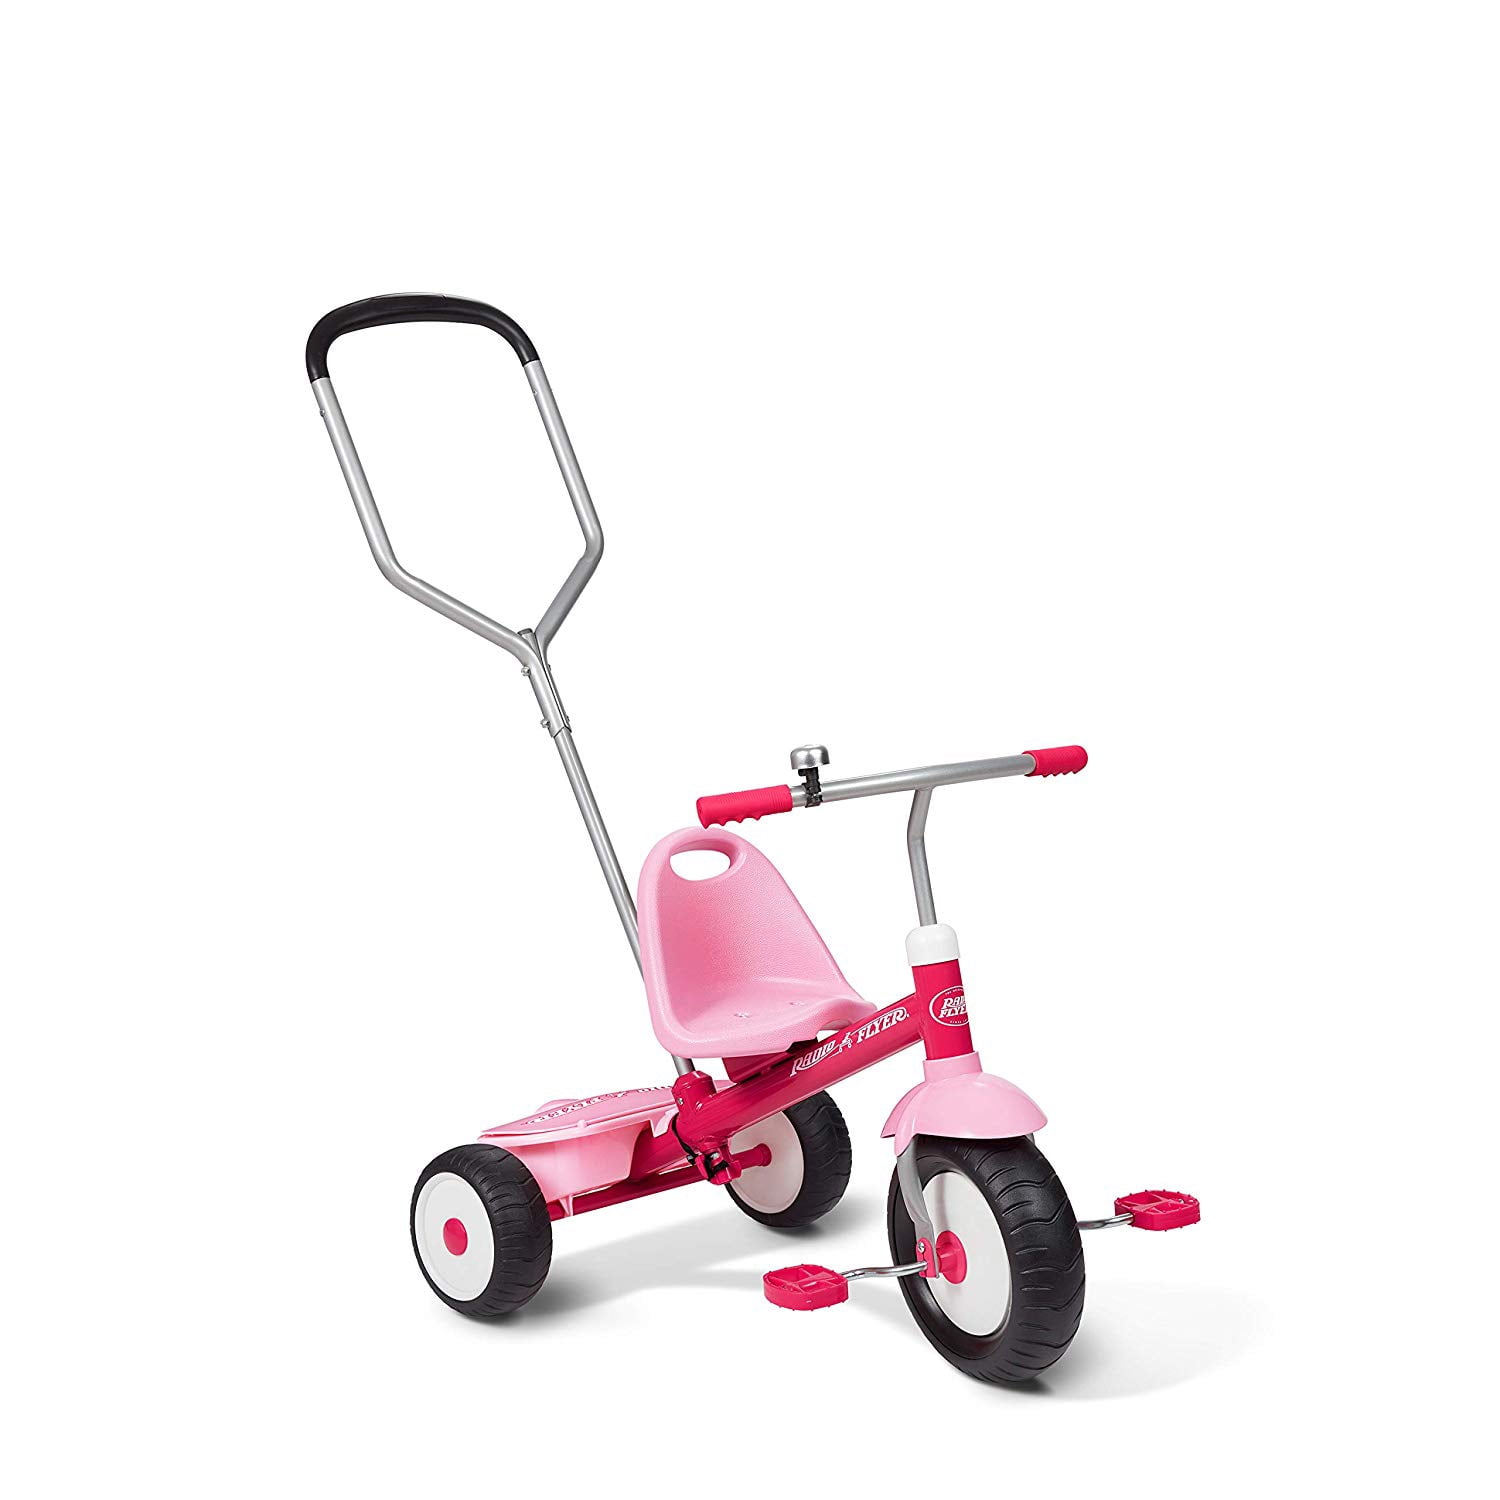 Kids Tricycle Bike Toddler Outdoor Velocipede Folding Trike Red or Pink NEW 